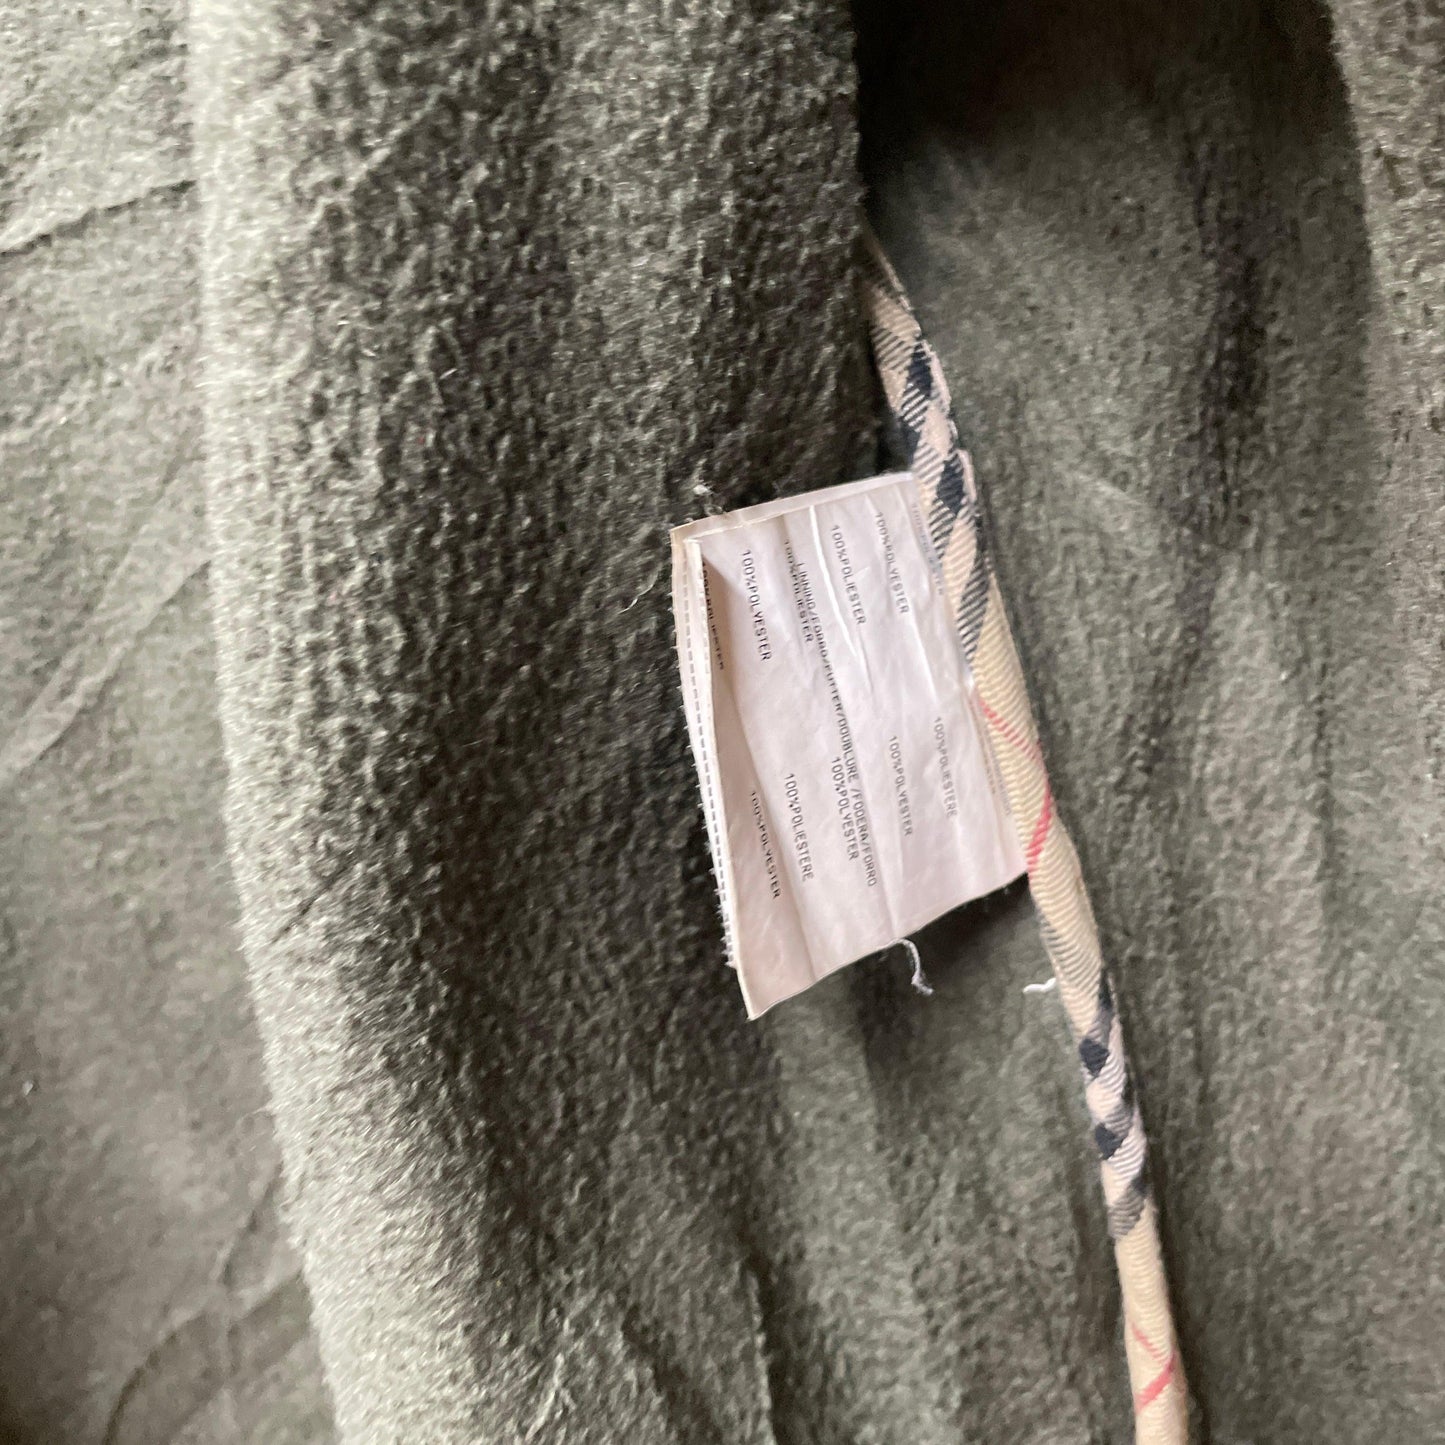 Burberrys jacket Burberry quilted jacket